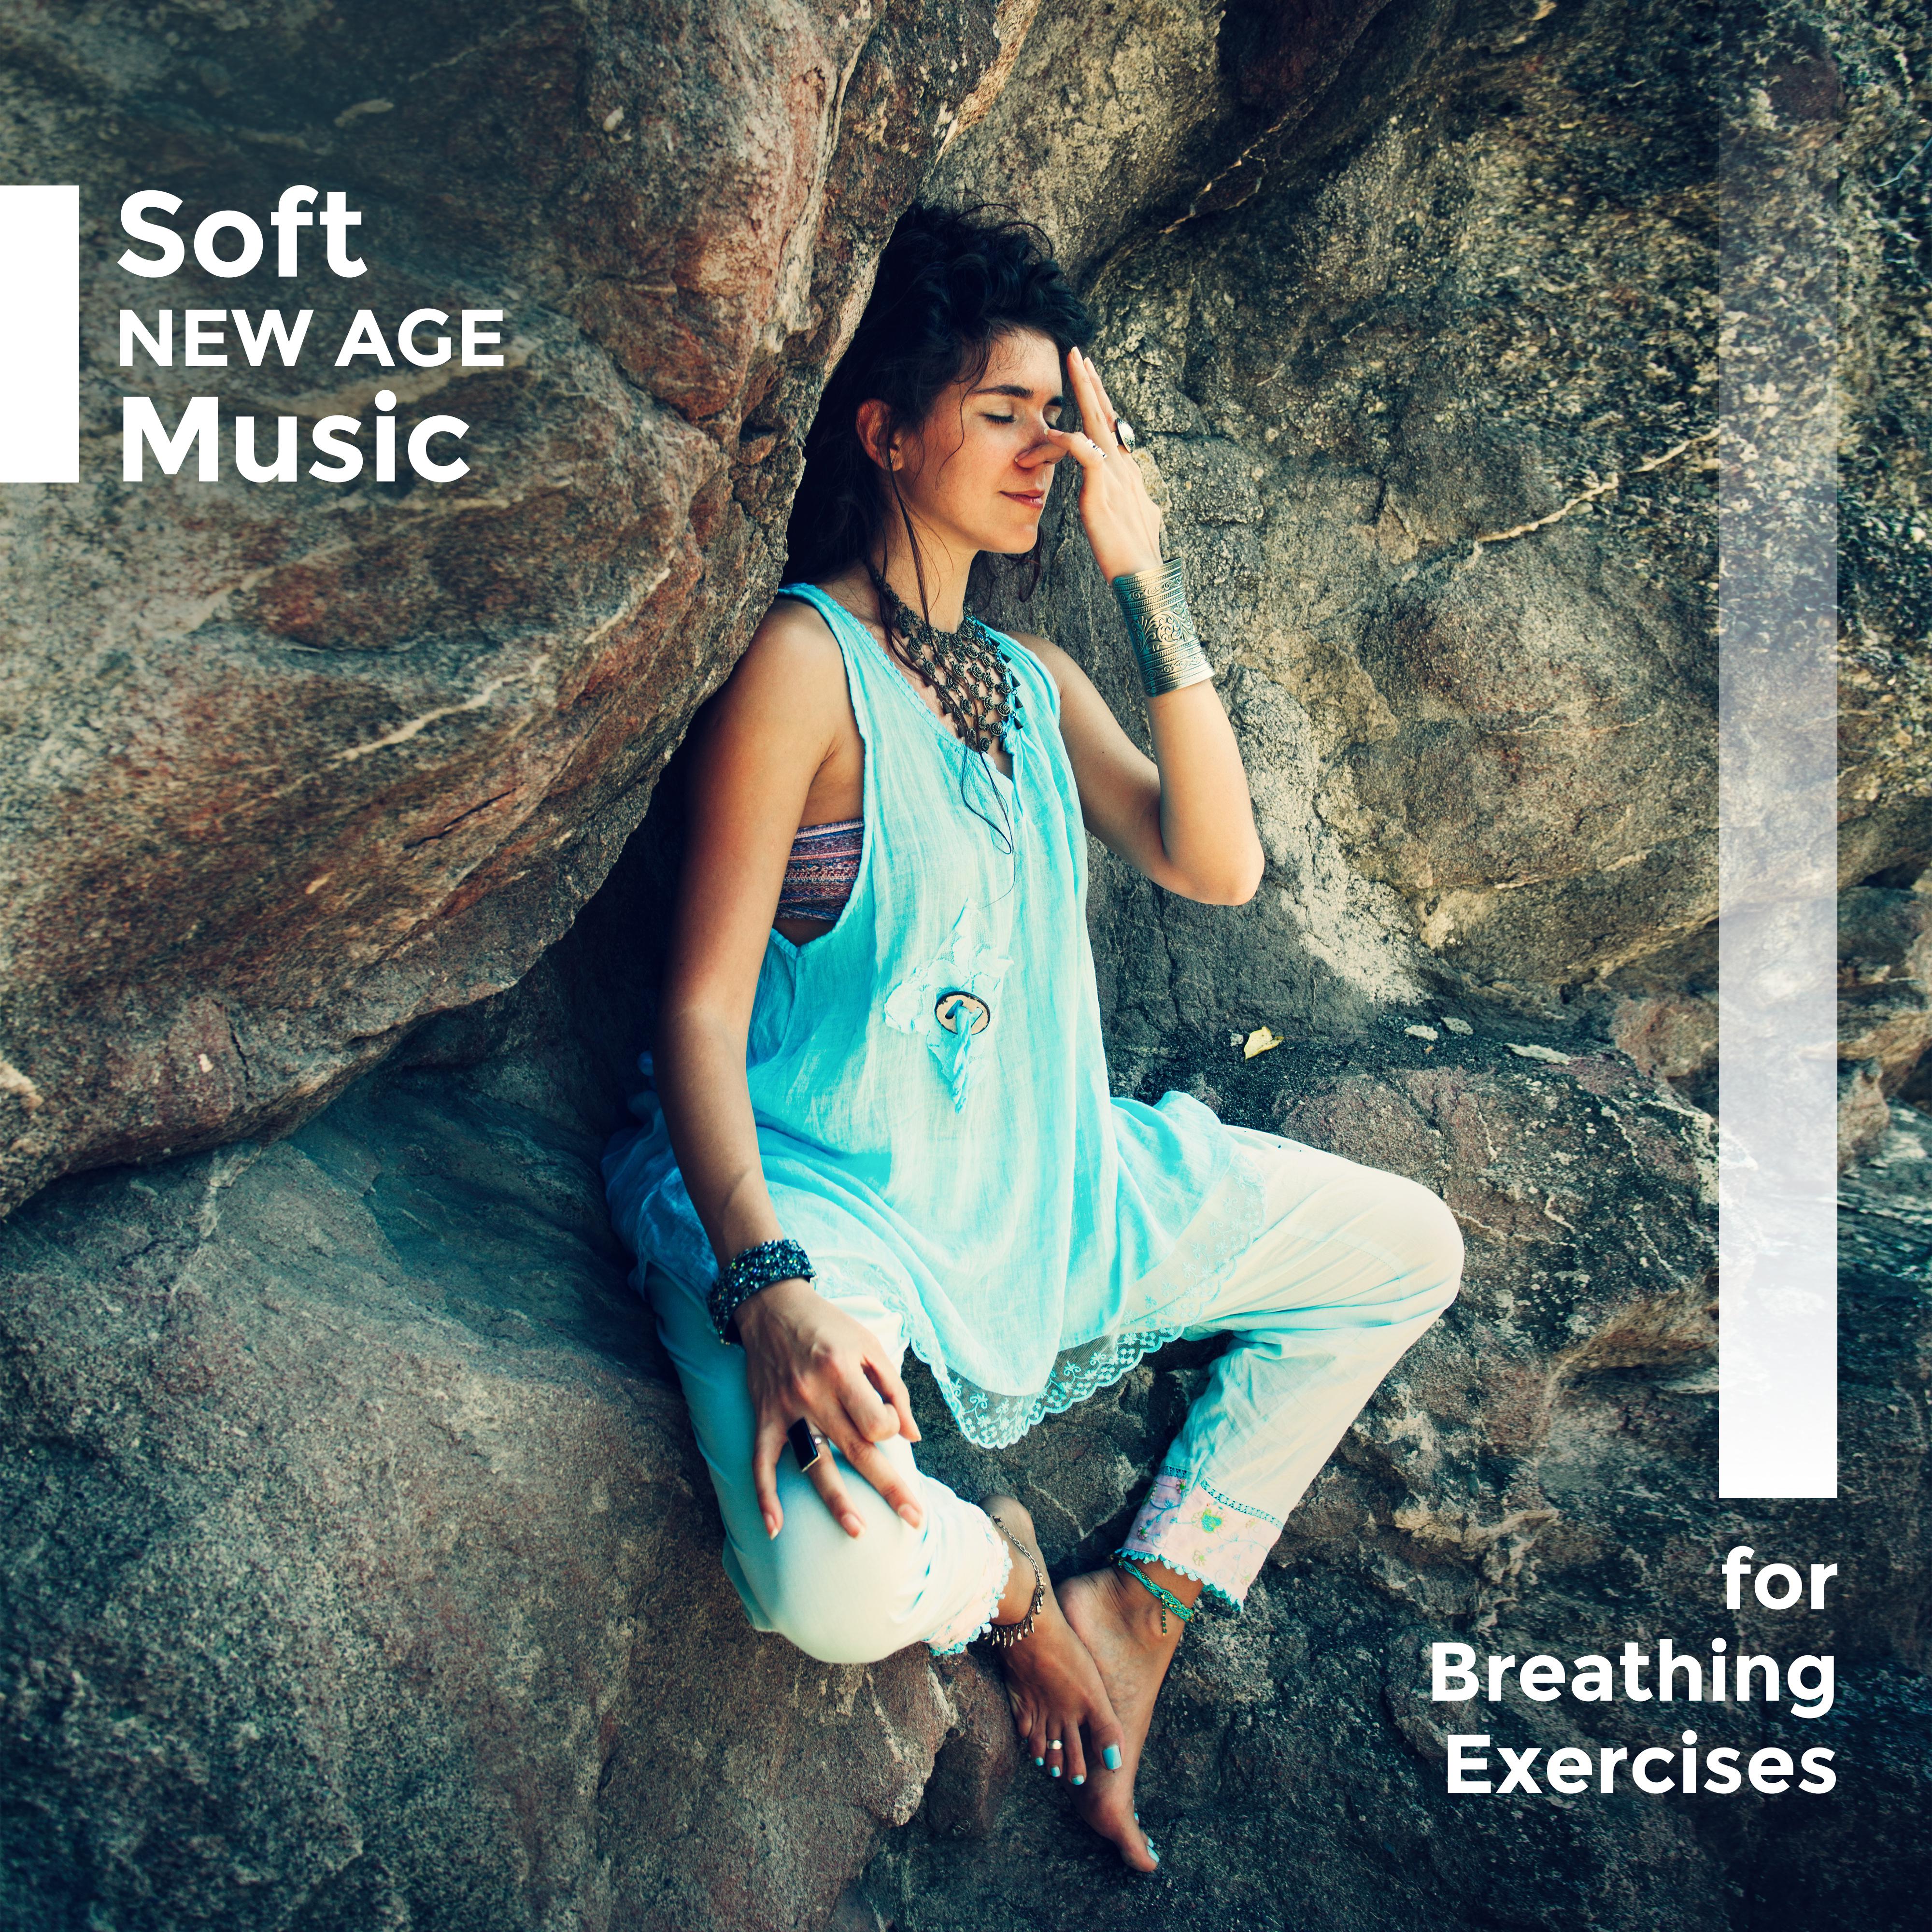 Soft New Age Music for Breathing Exercises